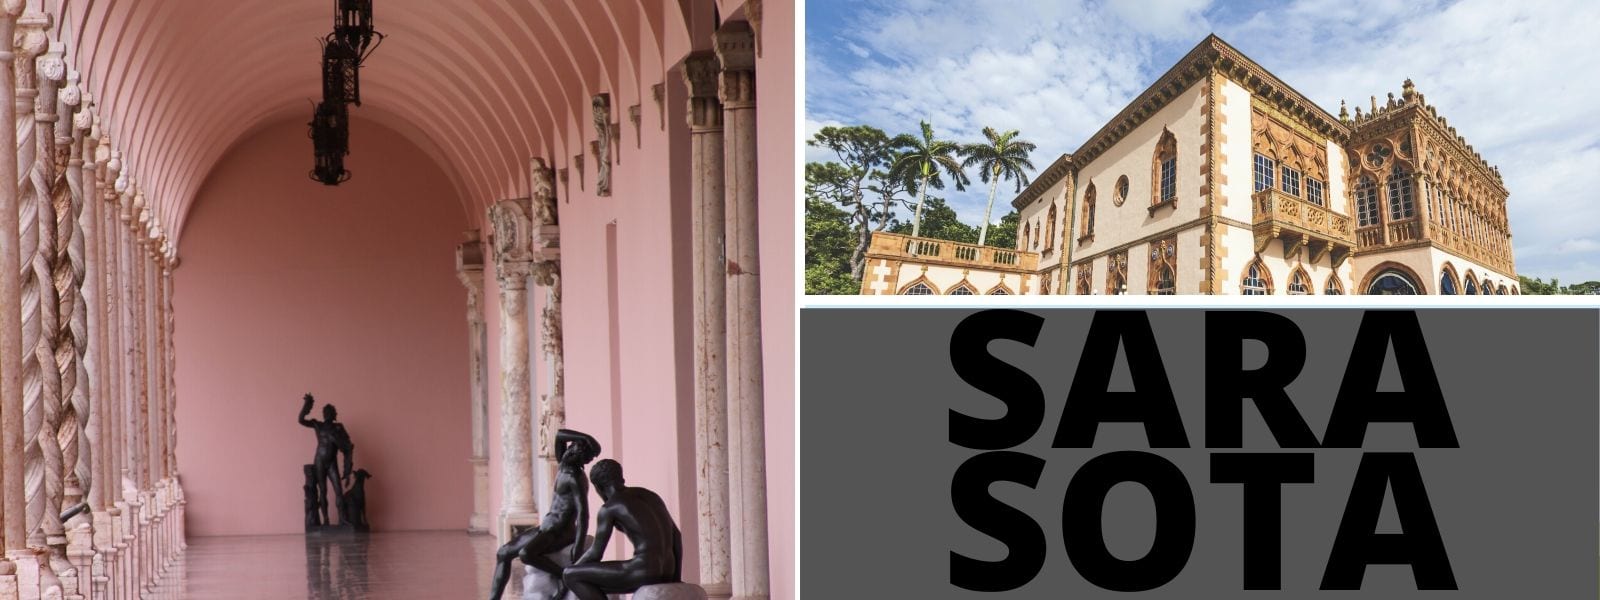 Ringling Museum of Art and the Ca' d'Zan in Historical Downtown Sarasota